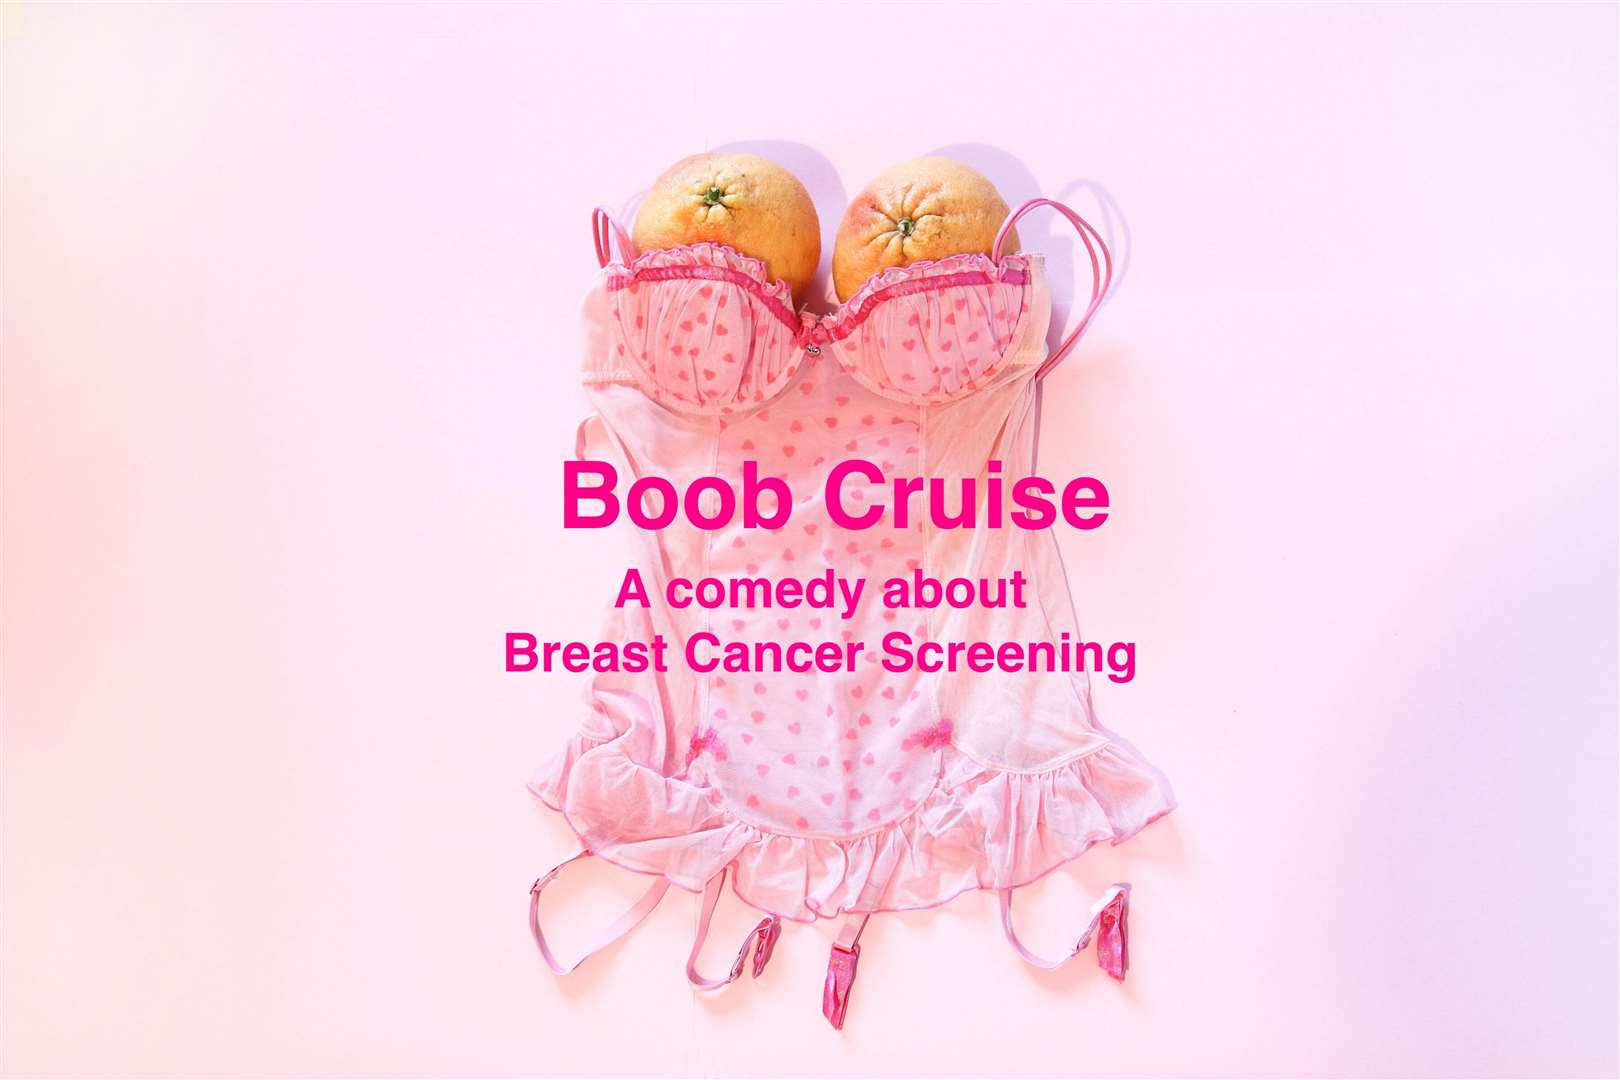 Right Lines Productions, based at Alves, hopes to raise £2500 through a Crowdfunder to screen a rehearsed reading of their draft 'Boob Cruise' script.